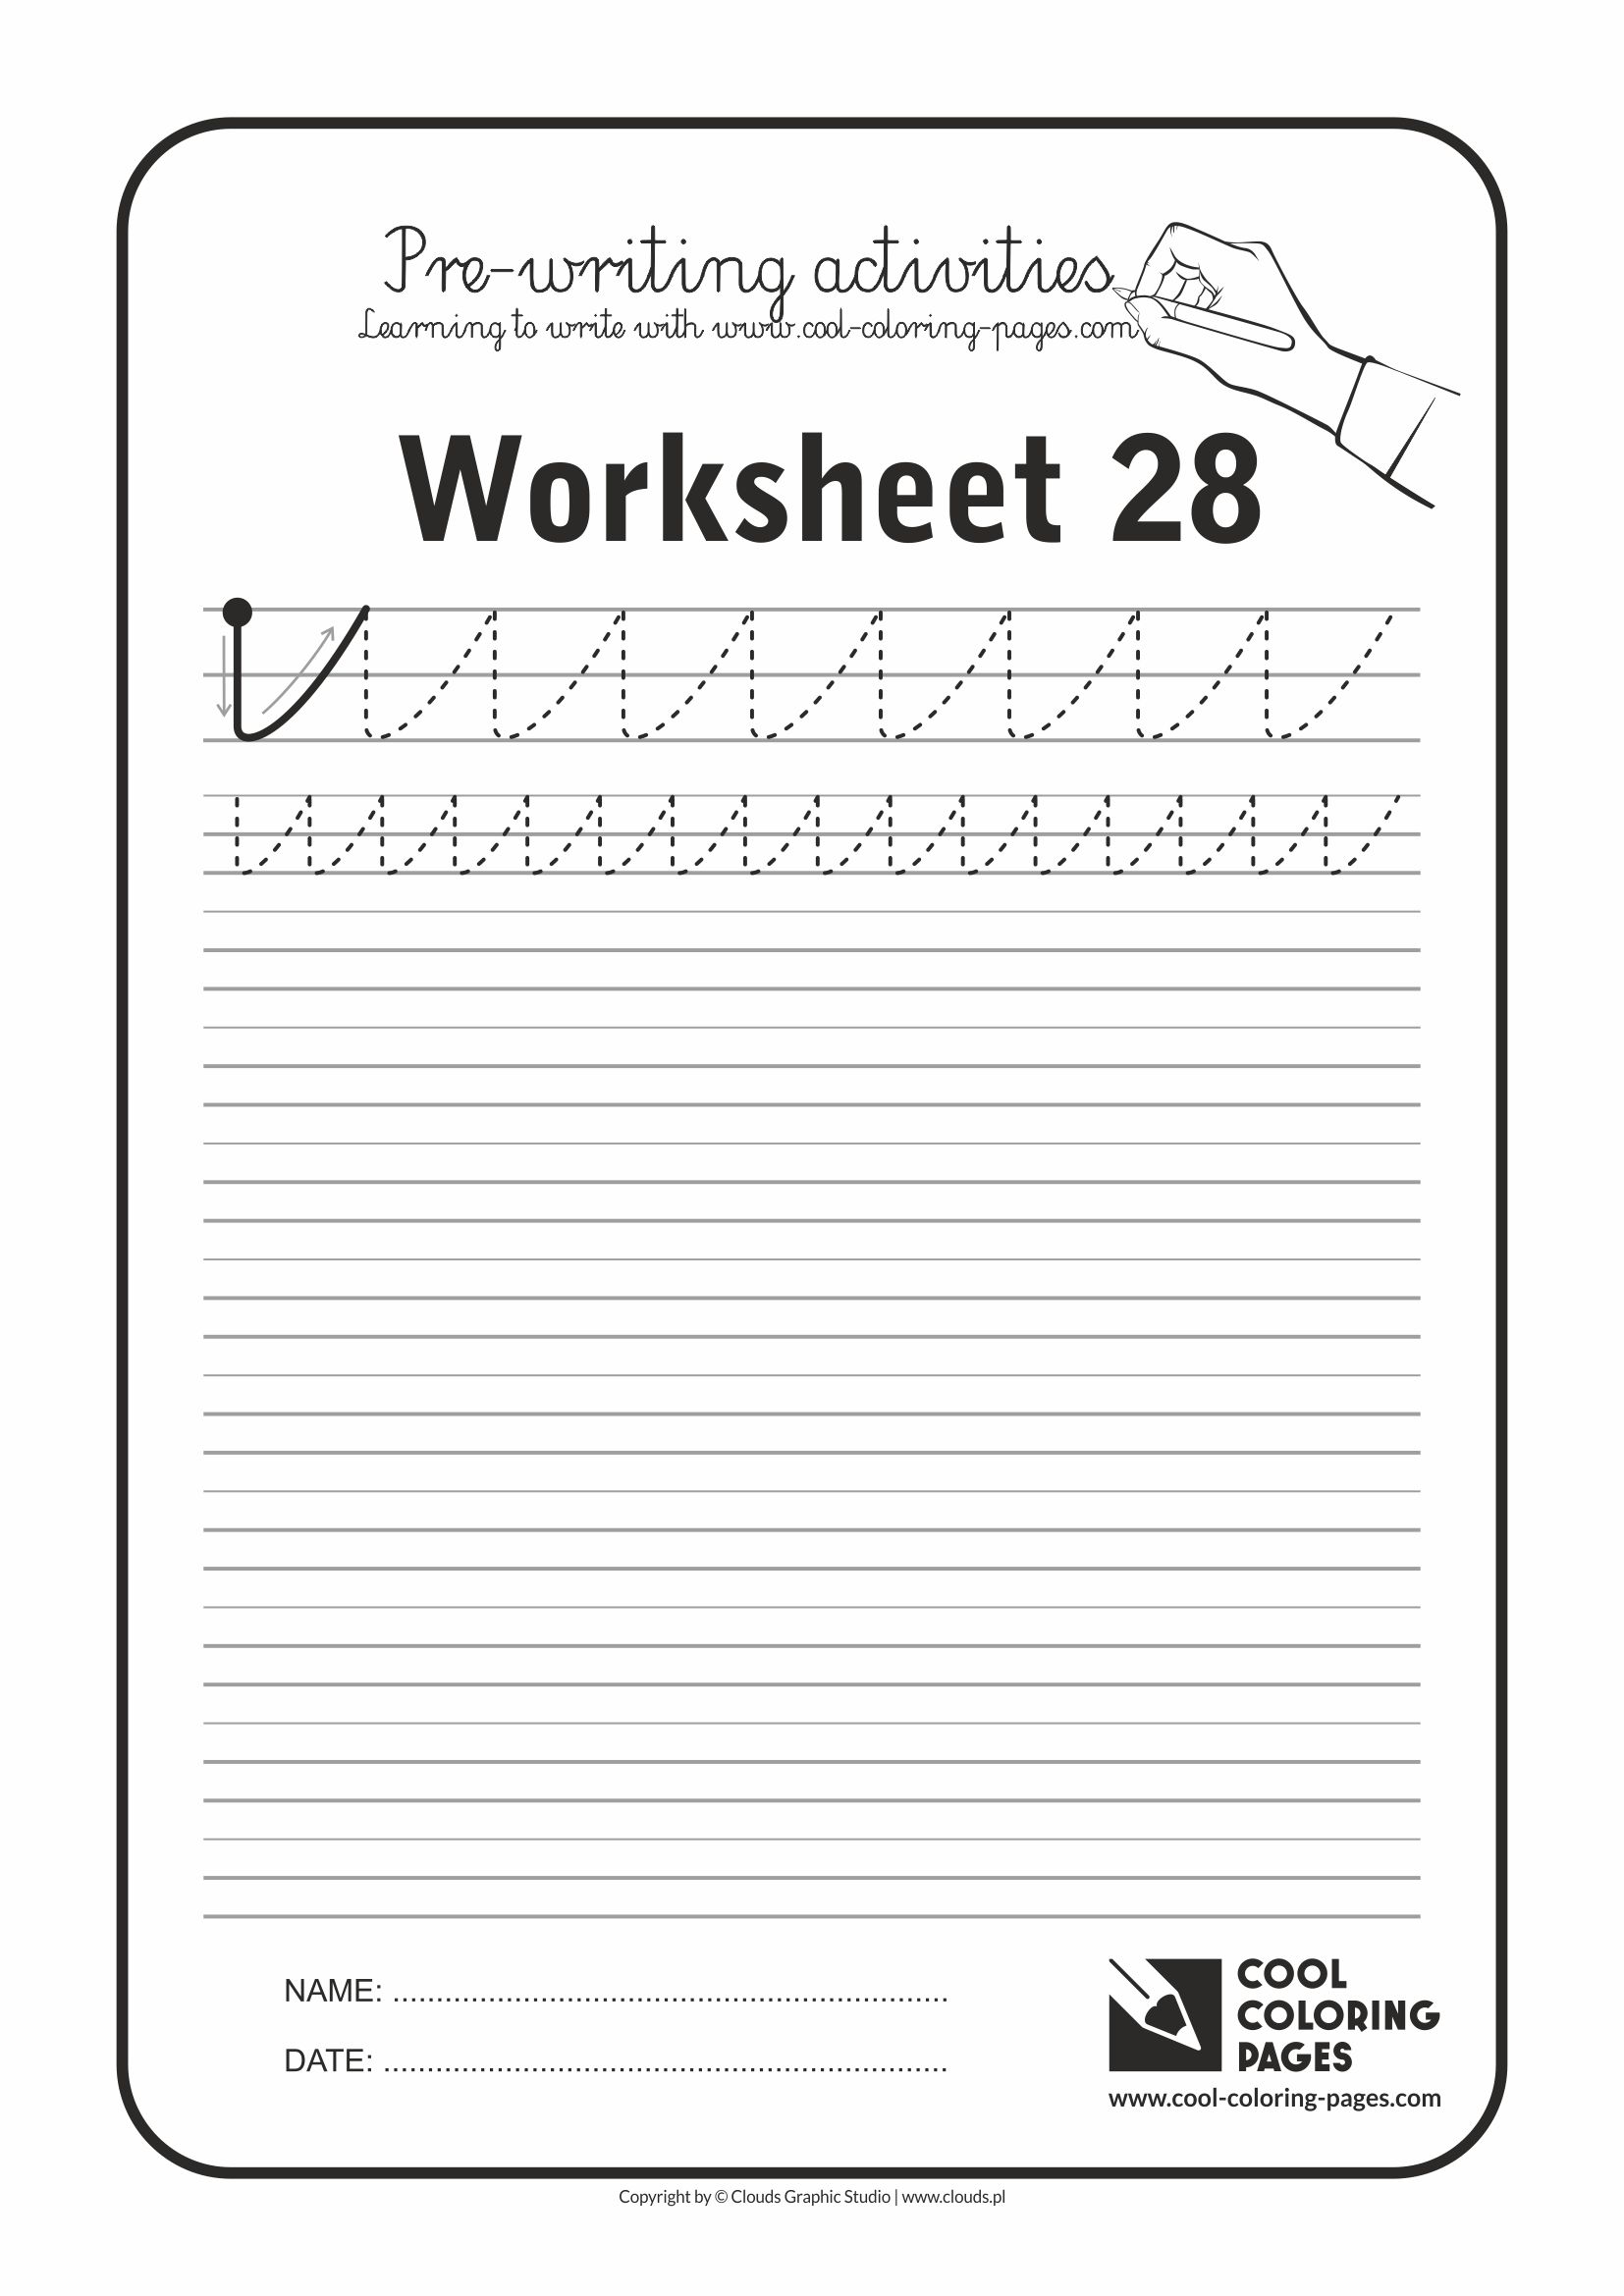 Cool Coloring Pages / Pre-writing activities / Worksheet no.28